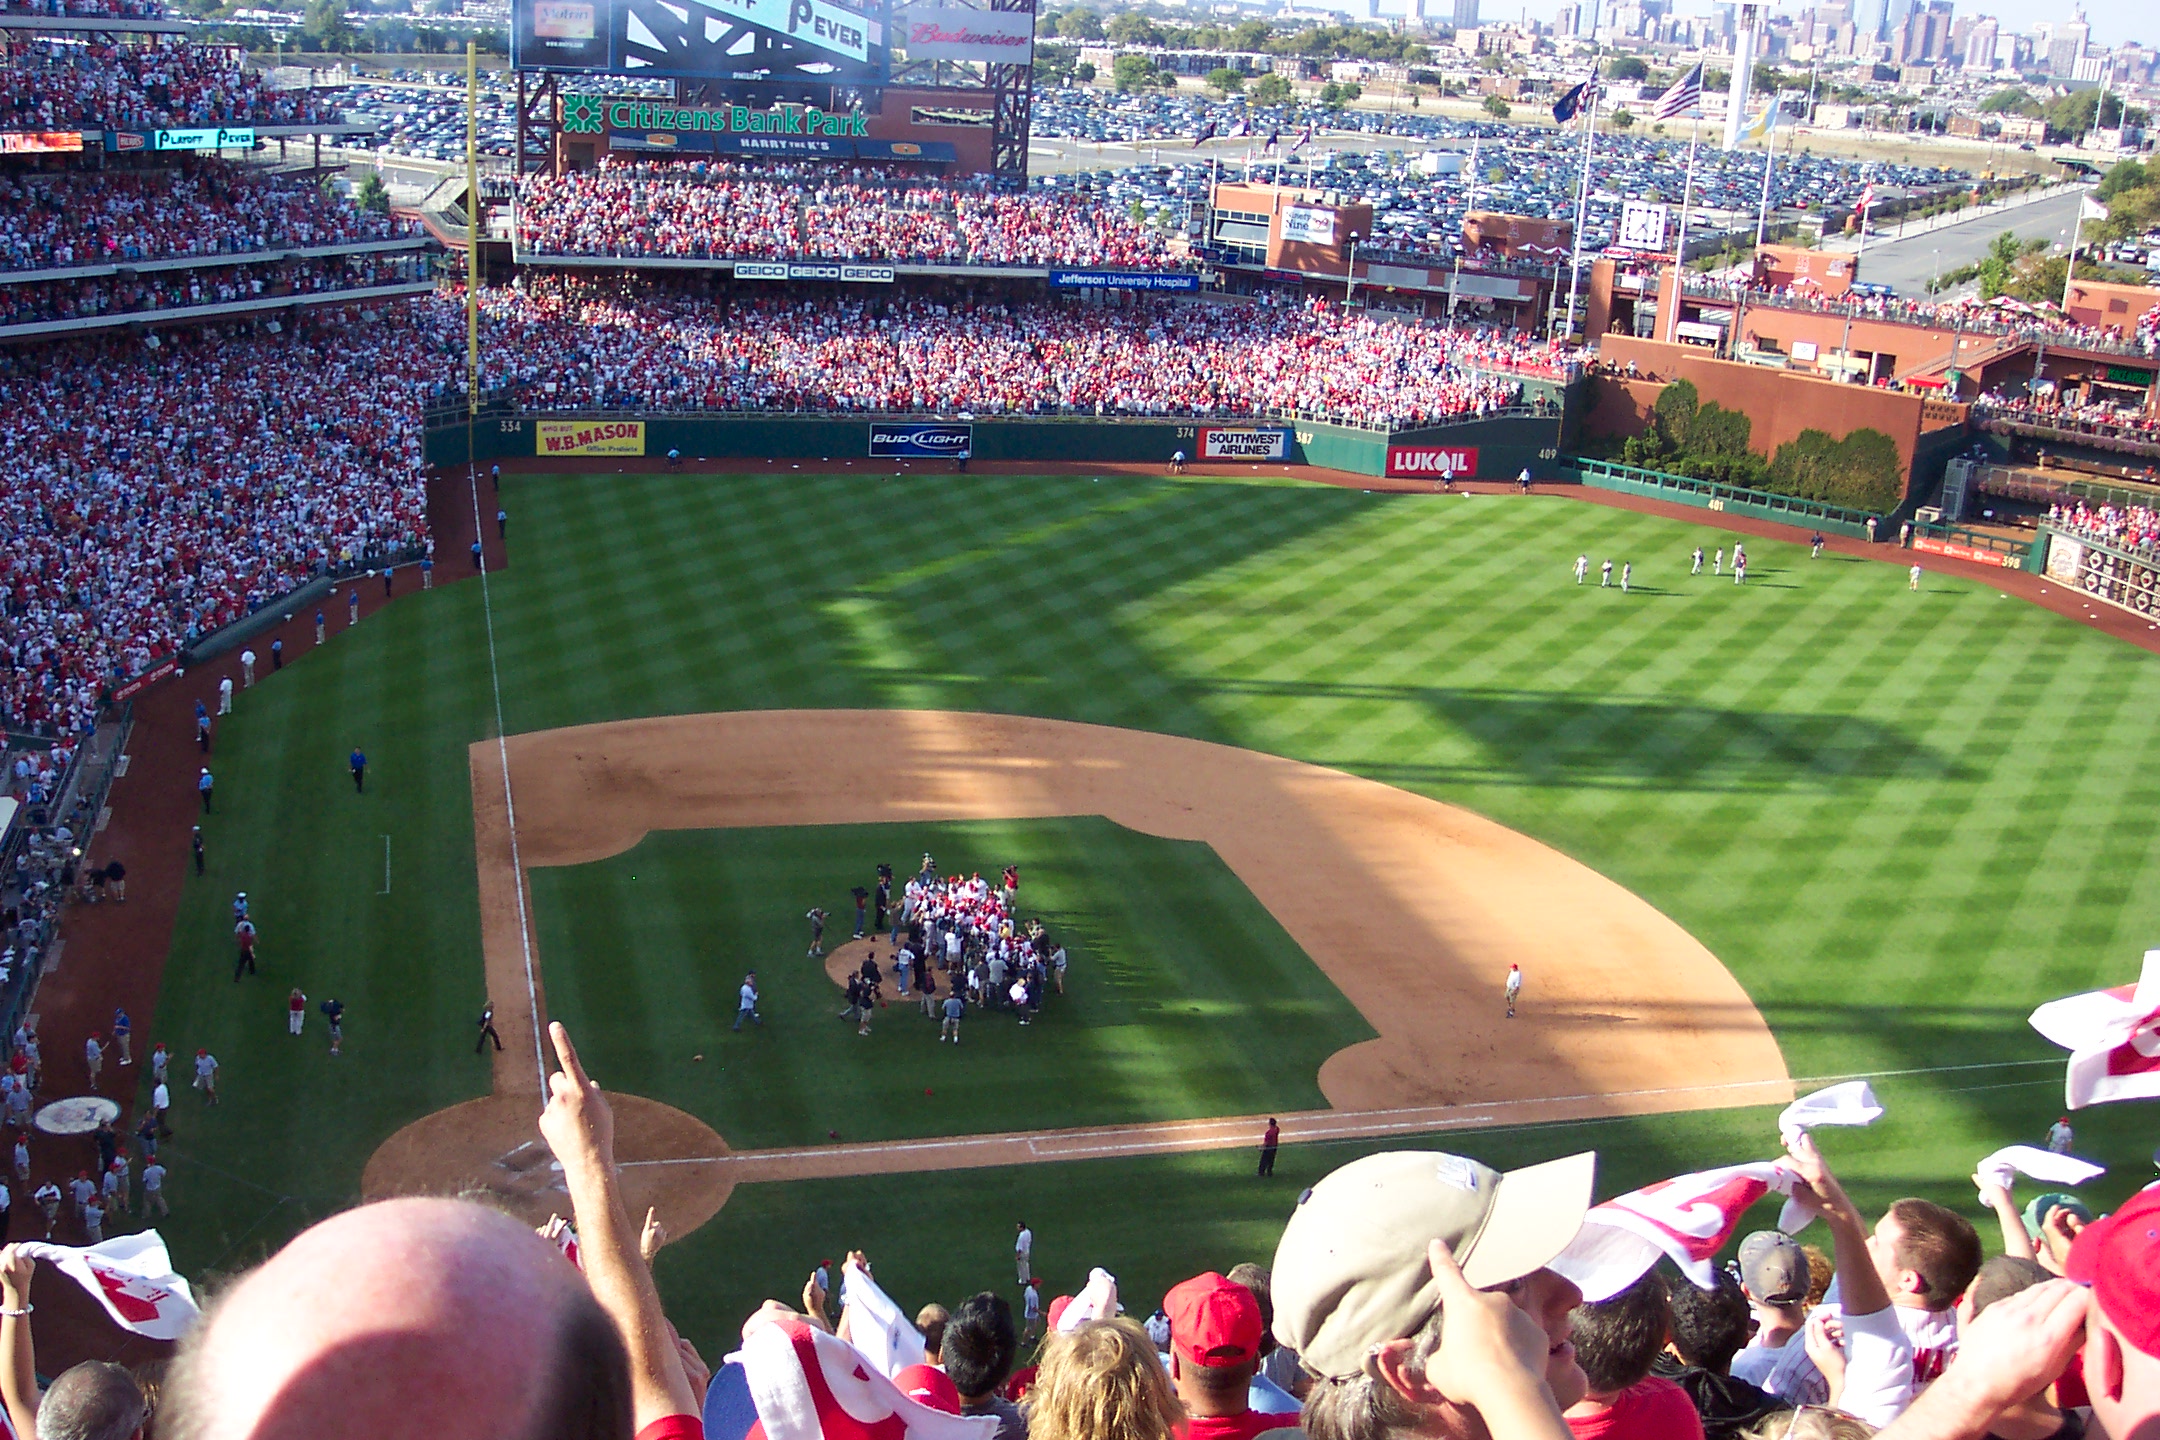 9 Thoughts From the Game (Now w/ Video) -- Phils Win 6-1 NL East Champions